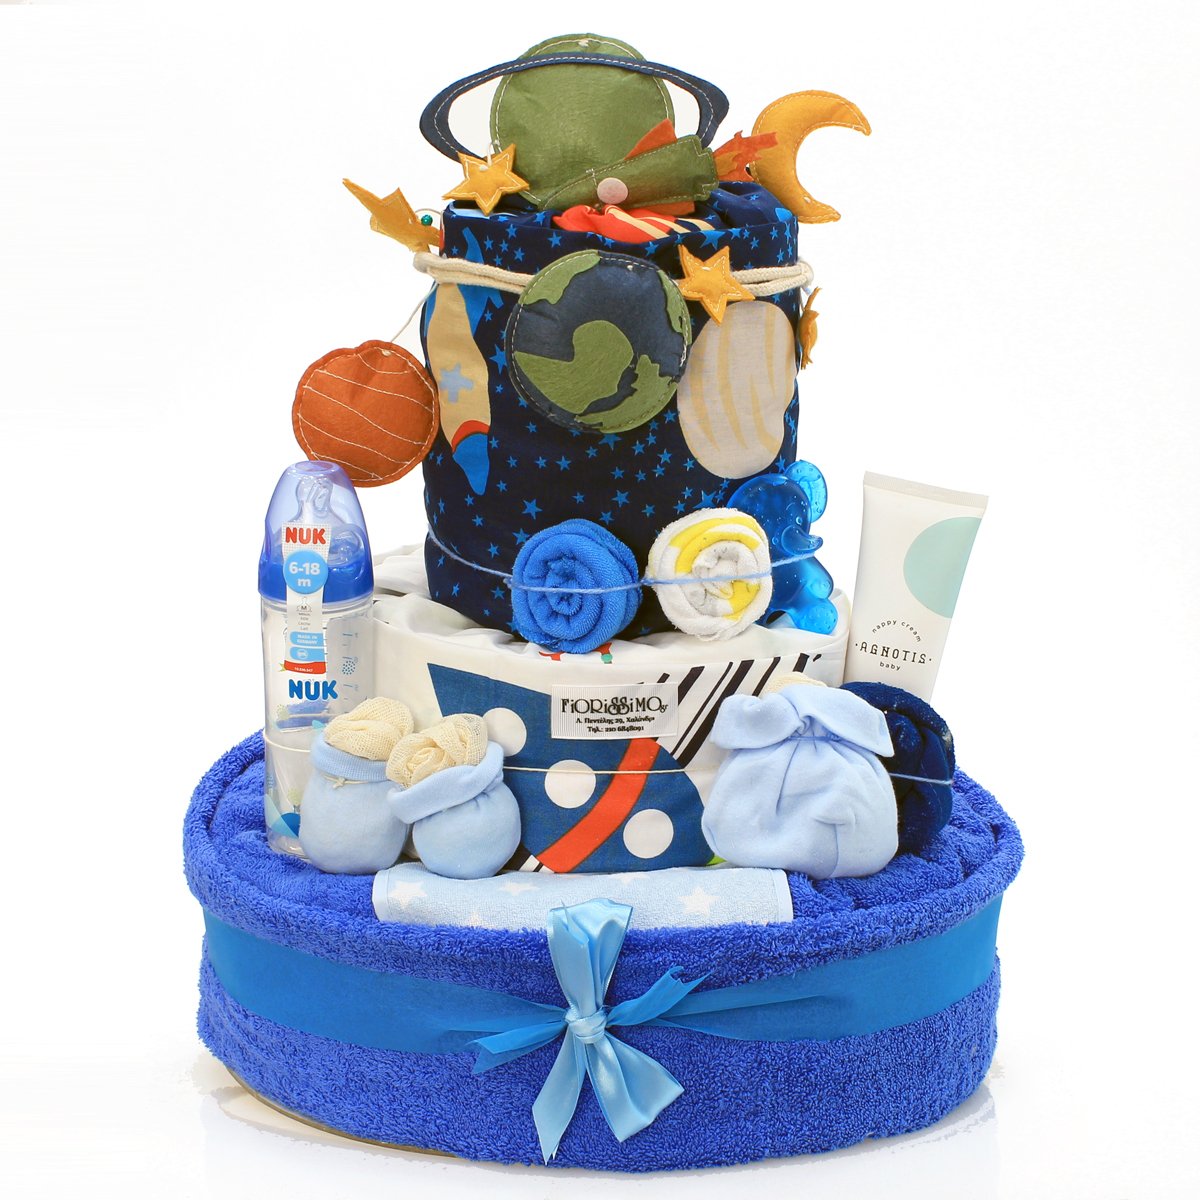 Diaper cake Love you to the moon and back!